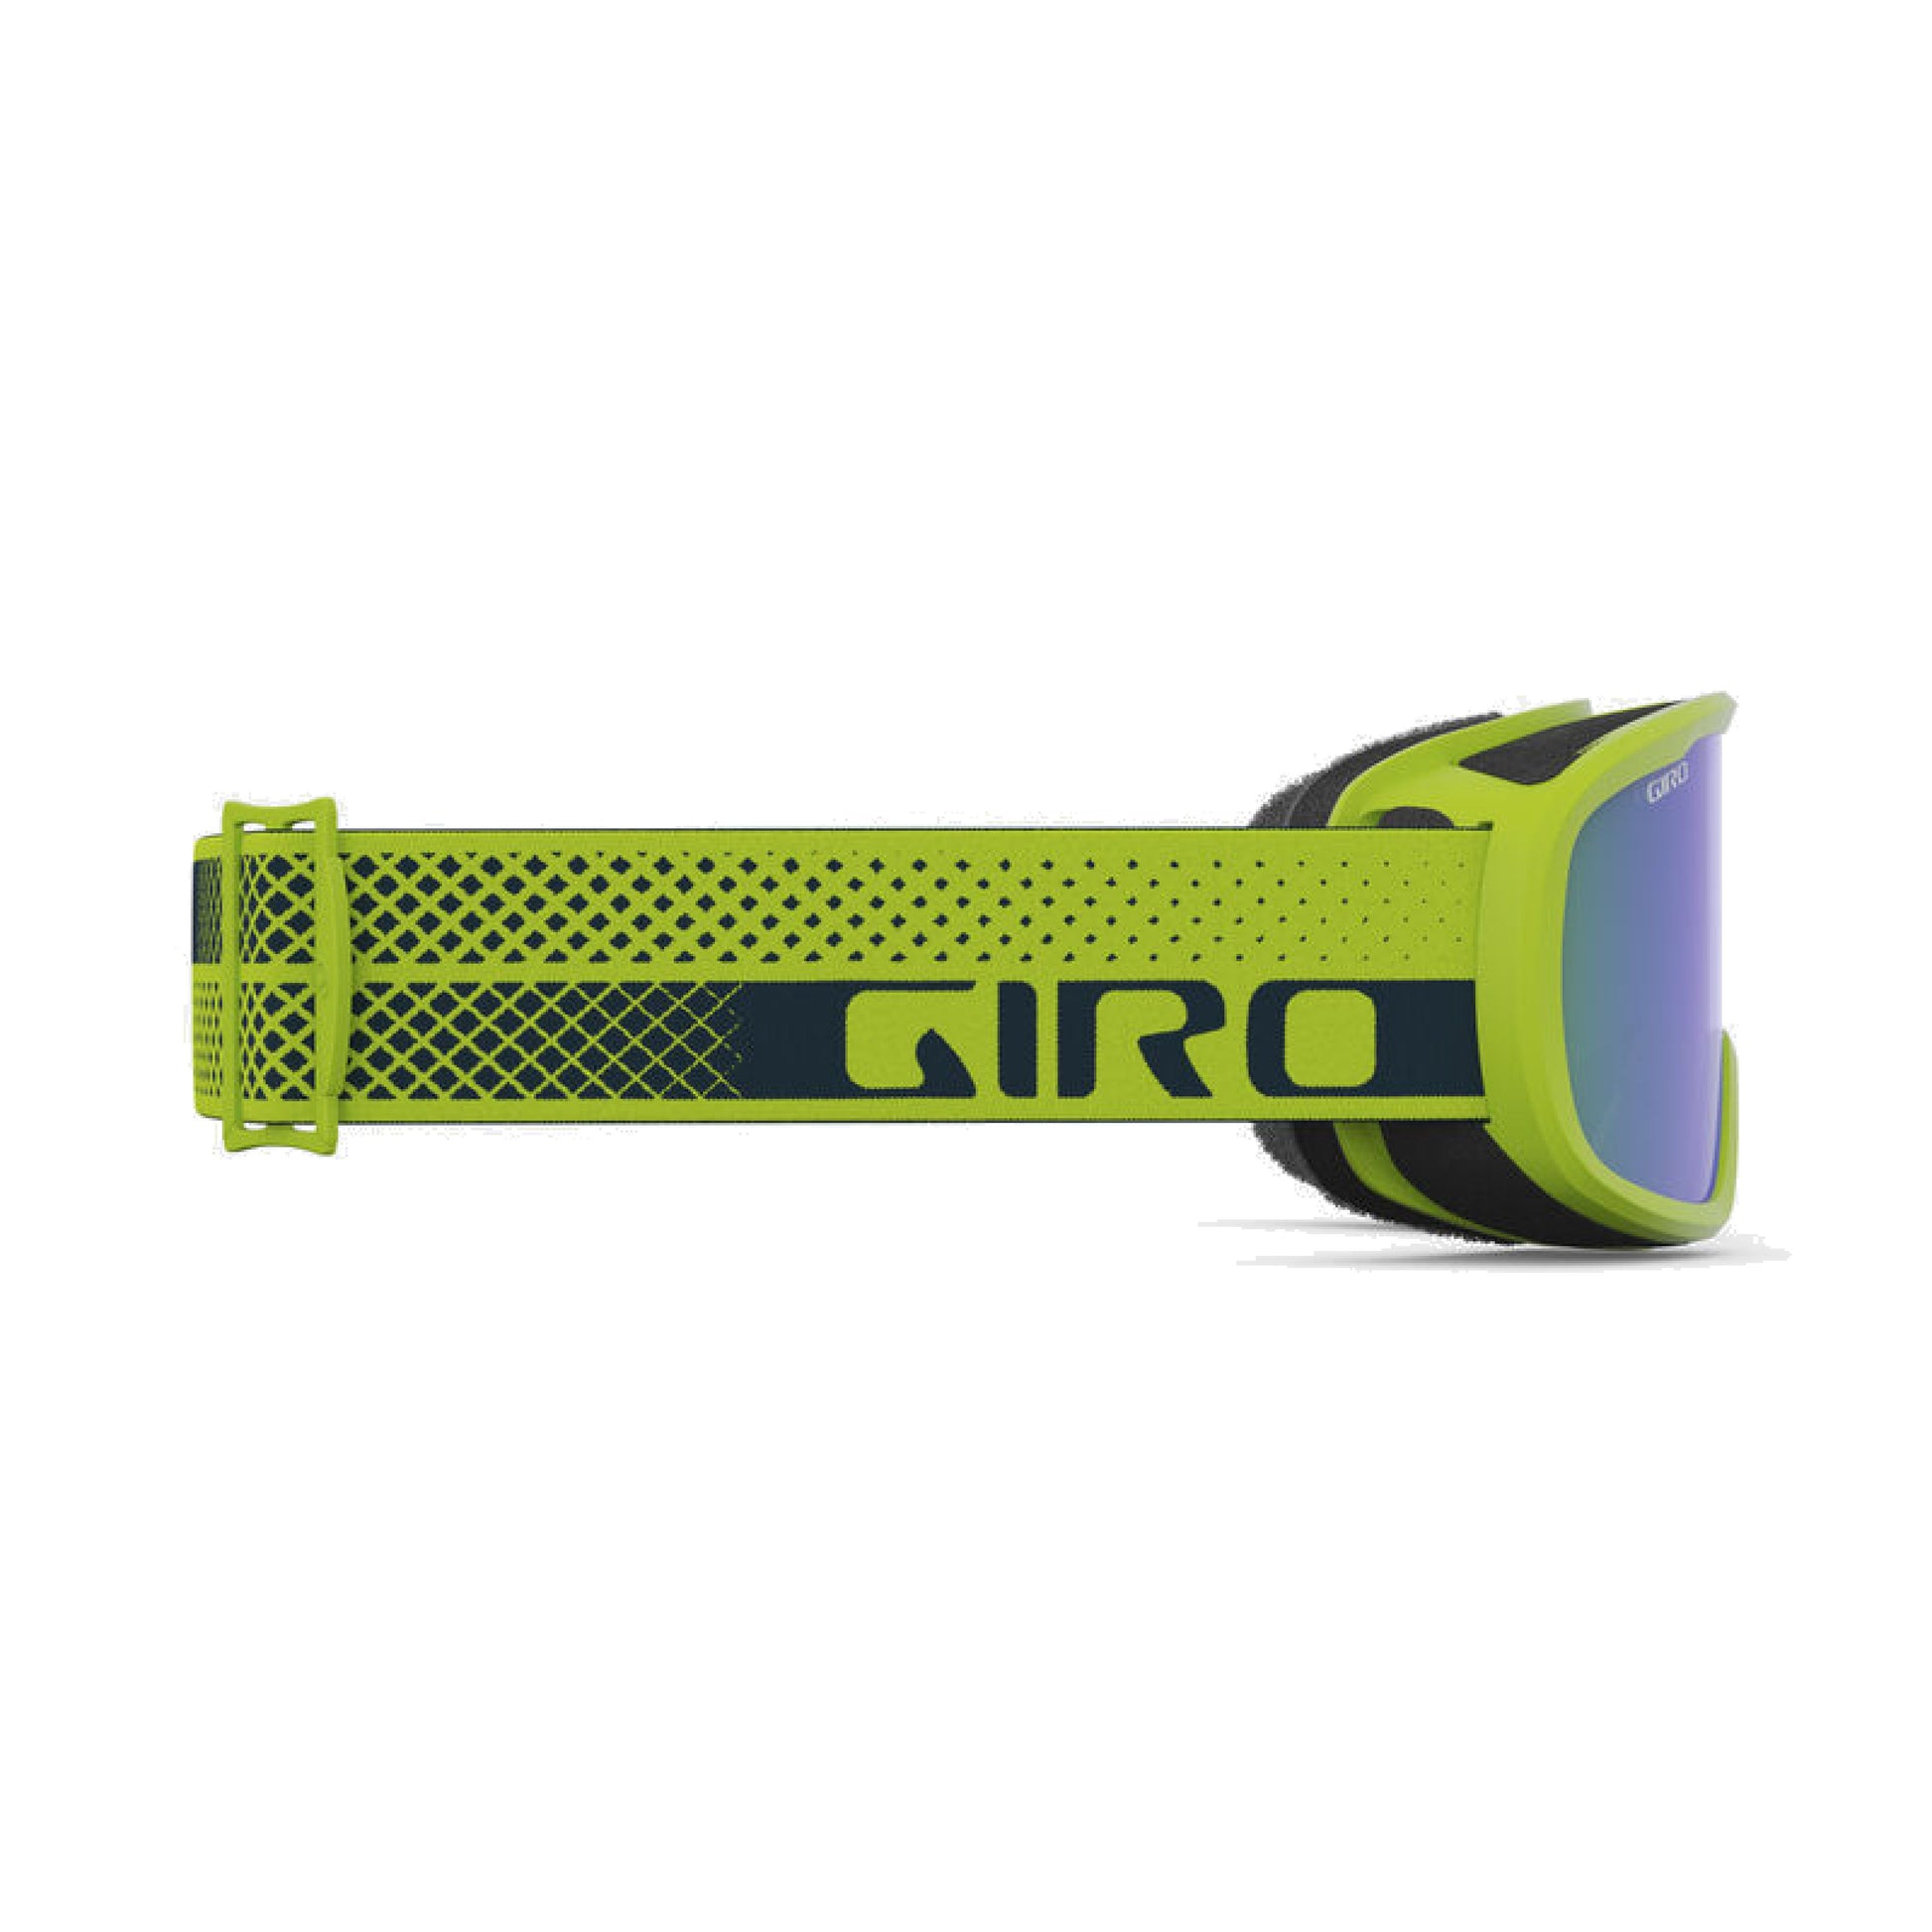 Giro Roam Snow Goggles Ano Lime Flow Loden Green Snow Goggles